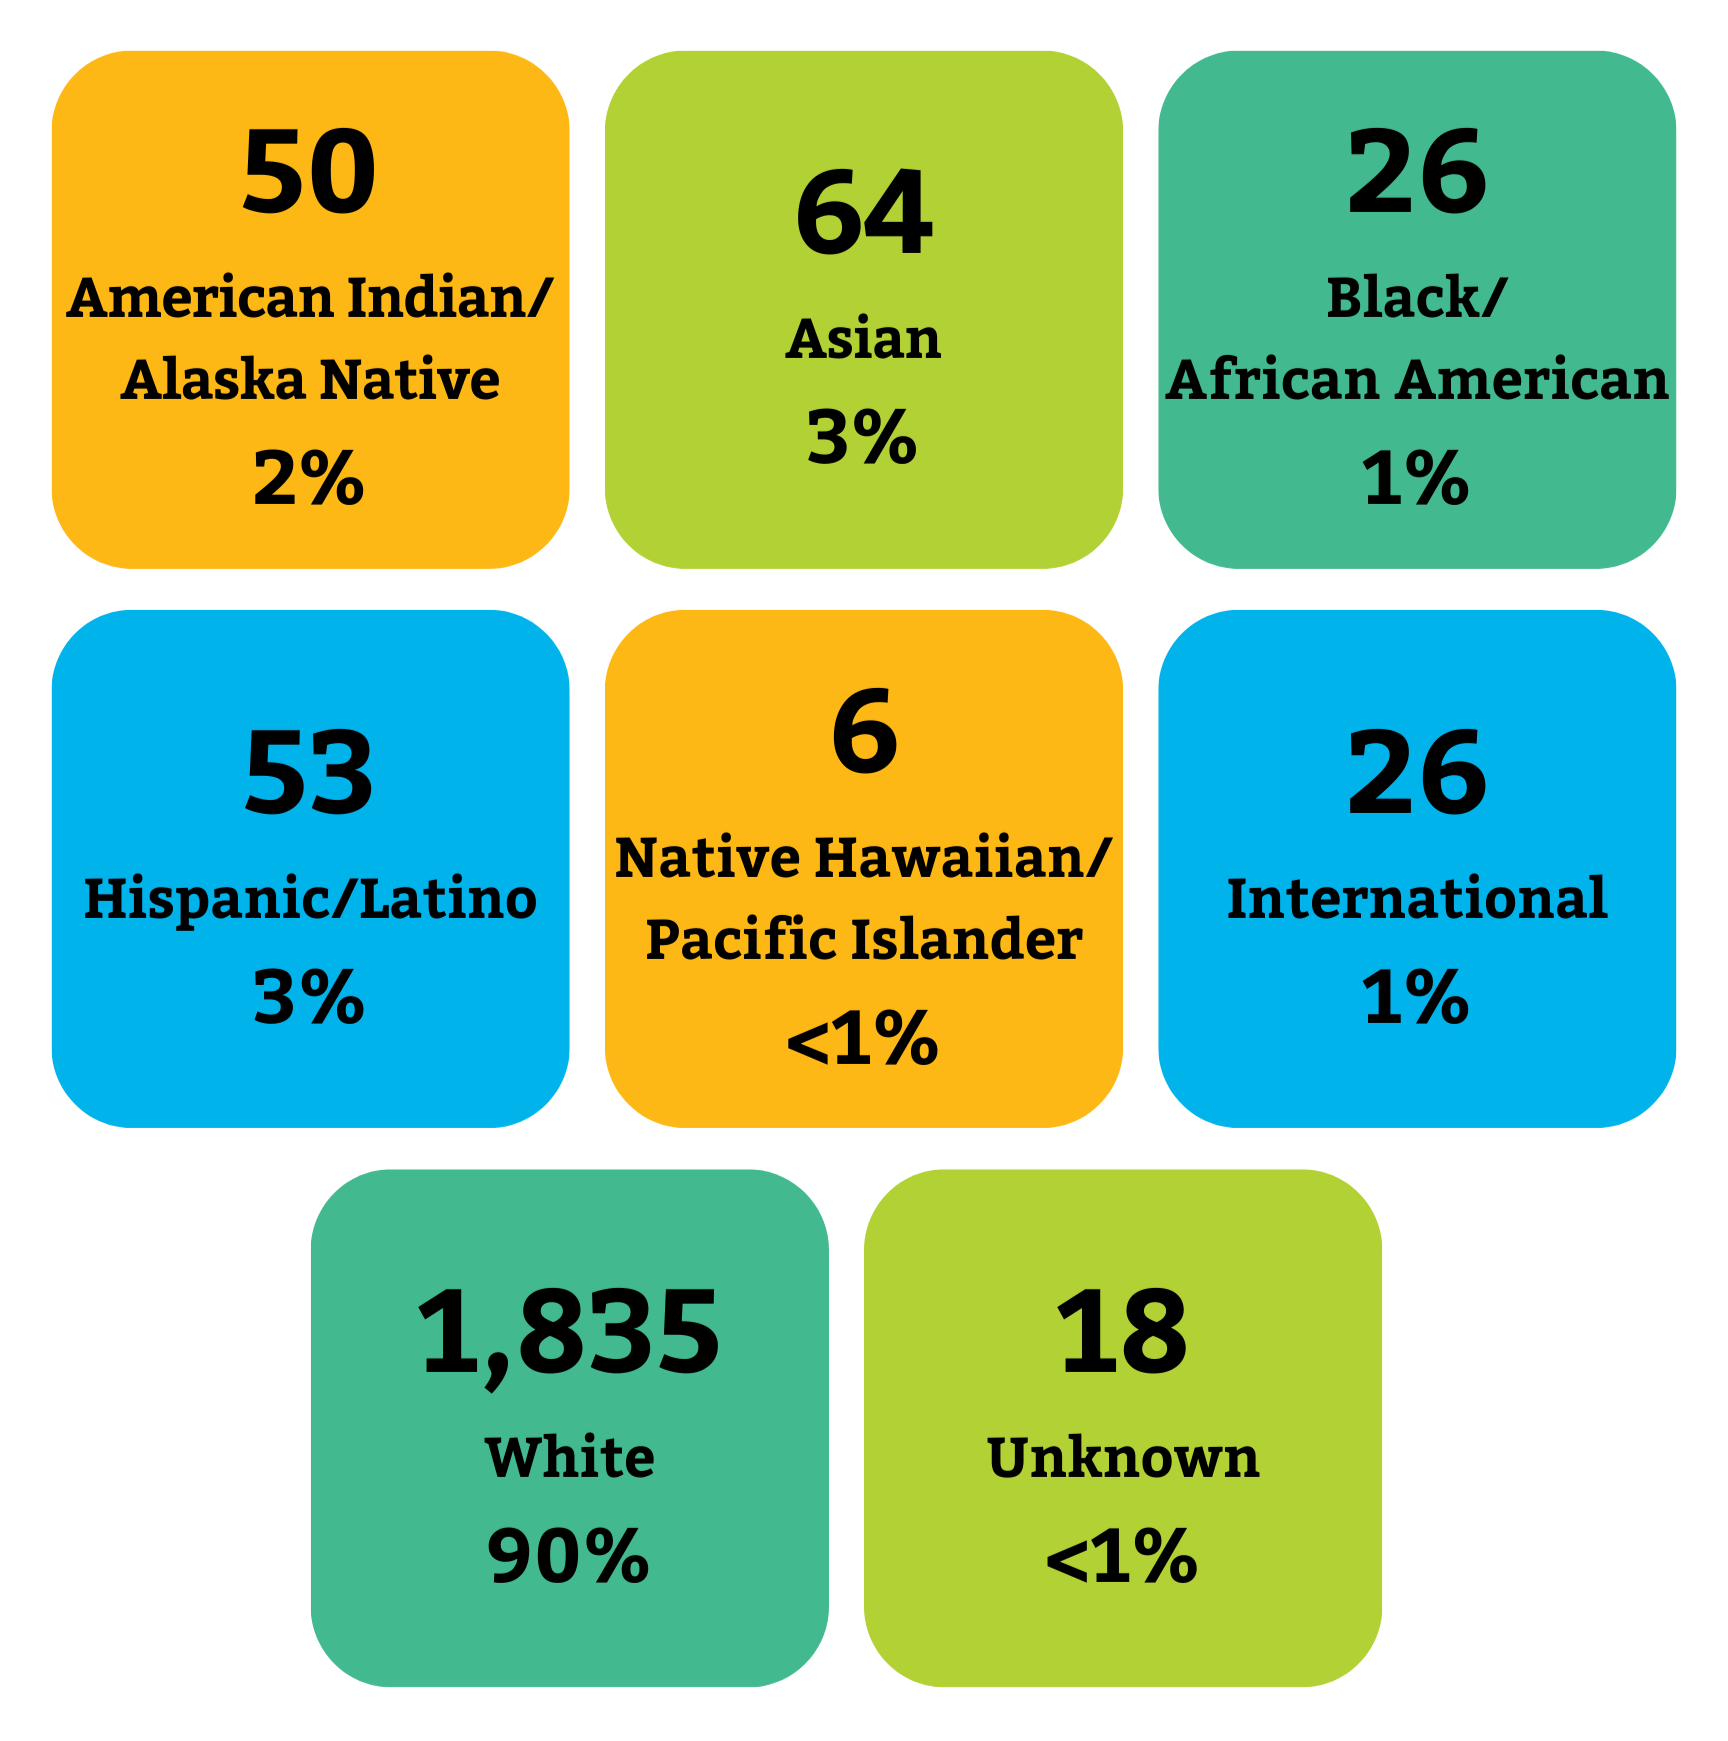 Graphic showing the demographics of staff by race and ethnicity. 50 American Indian/Alaska Native (2%), 64 Asian (3%), 26 Black/African American (1%), 53 Hispanic/Latino (3%), 26 International (1%), 6 Native Hawaiian/Pacific Islander (<1%), 1,835 White (90%), 18 Unknown (<1%).